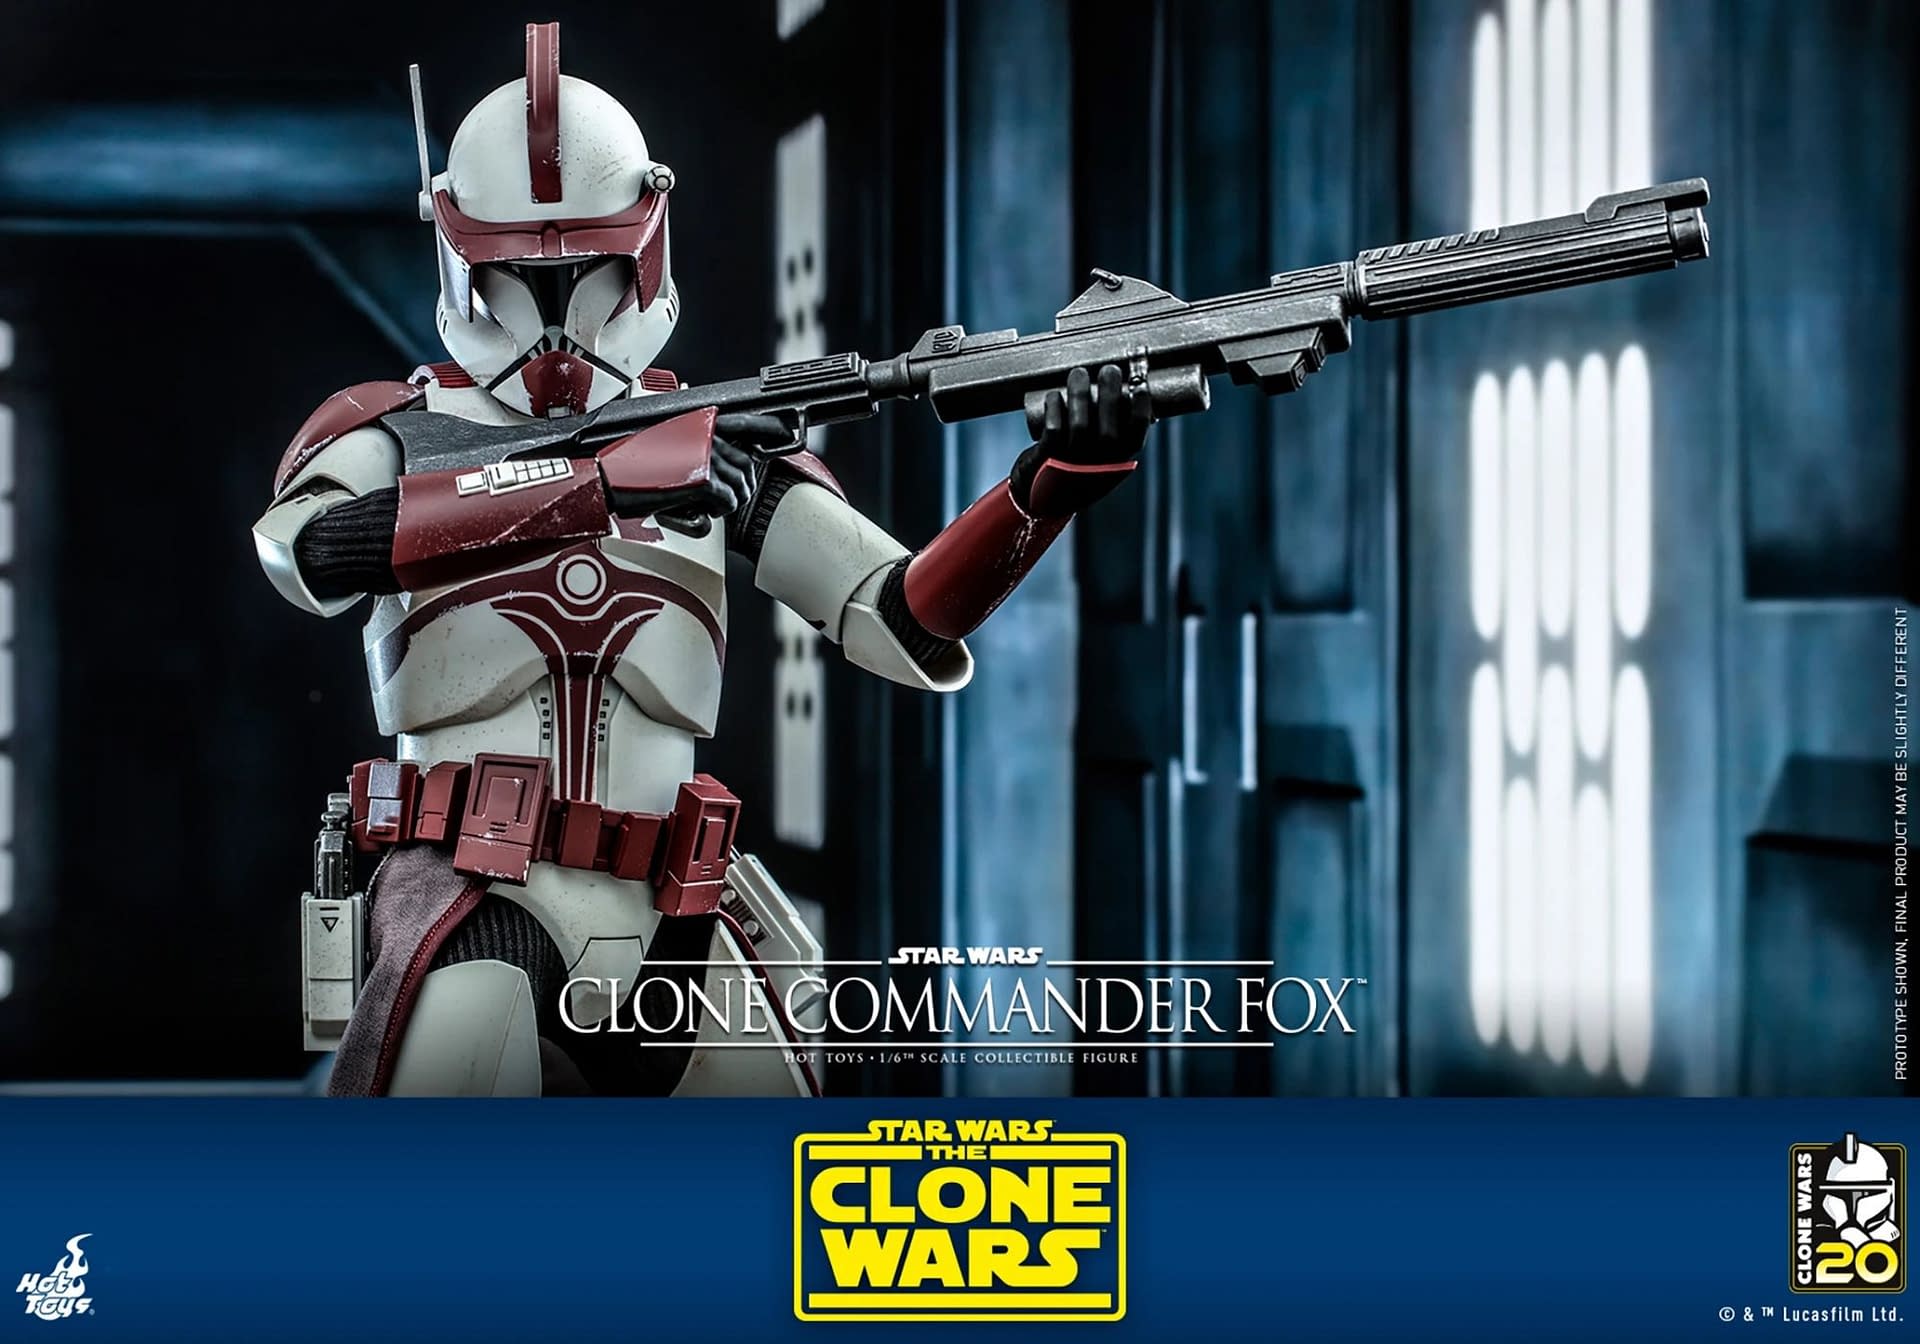 Star Wars: The Clone Wars Darth Sidious Has Arrived with Hot Toys